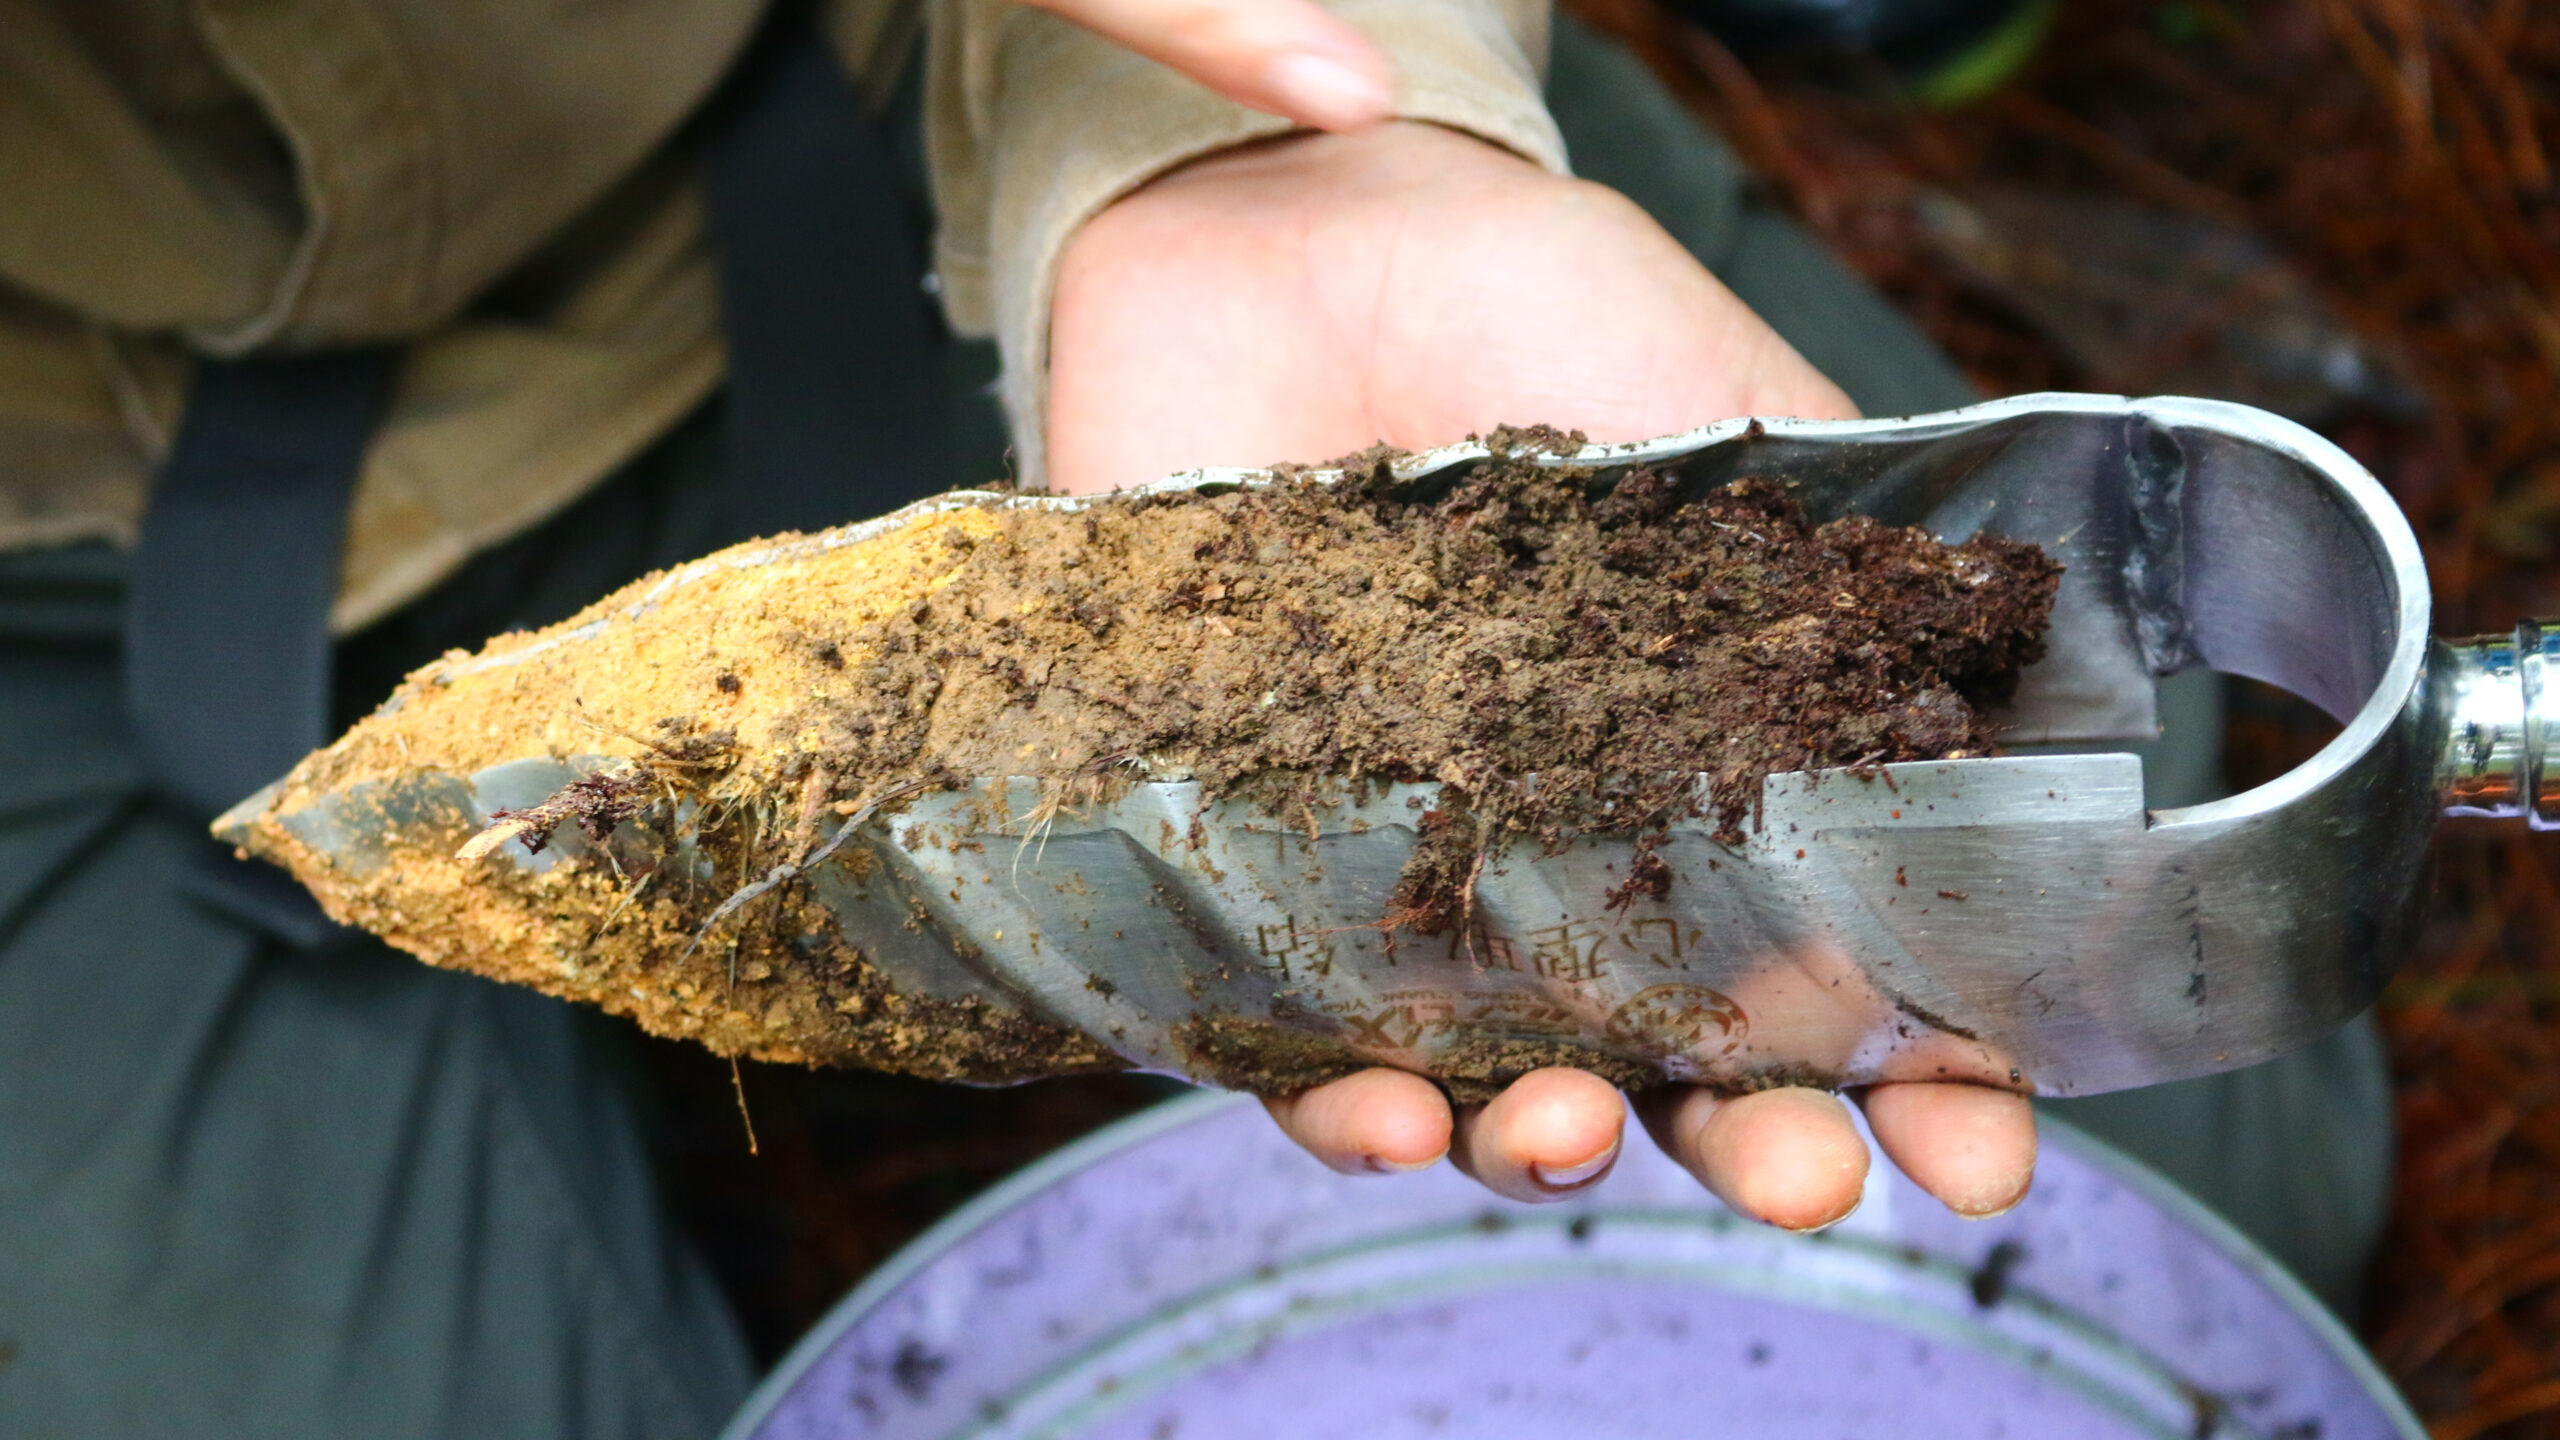 Alt: A researcher holds a soil sample in the palm of their hand.